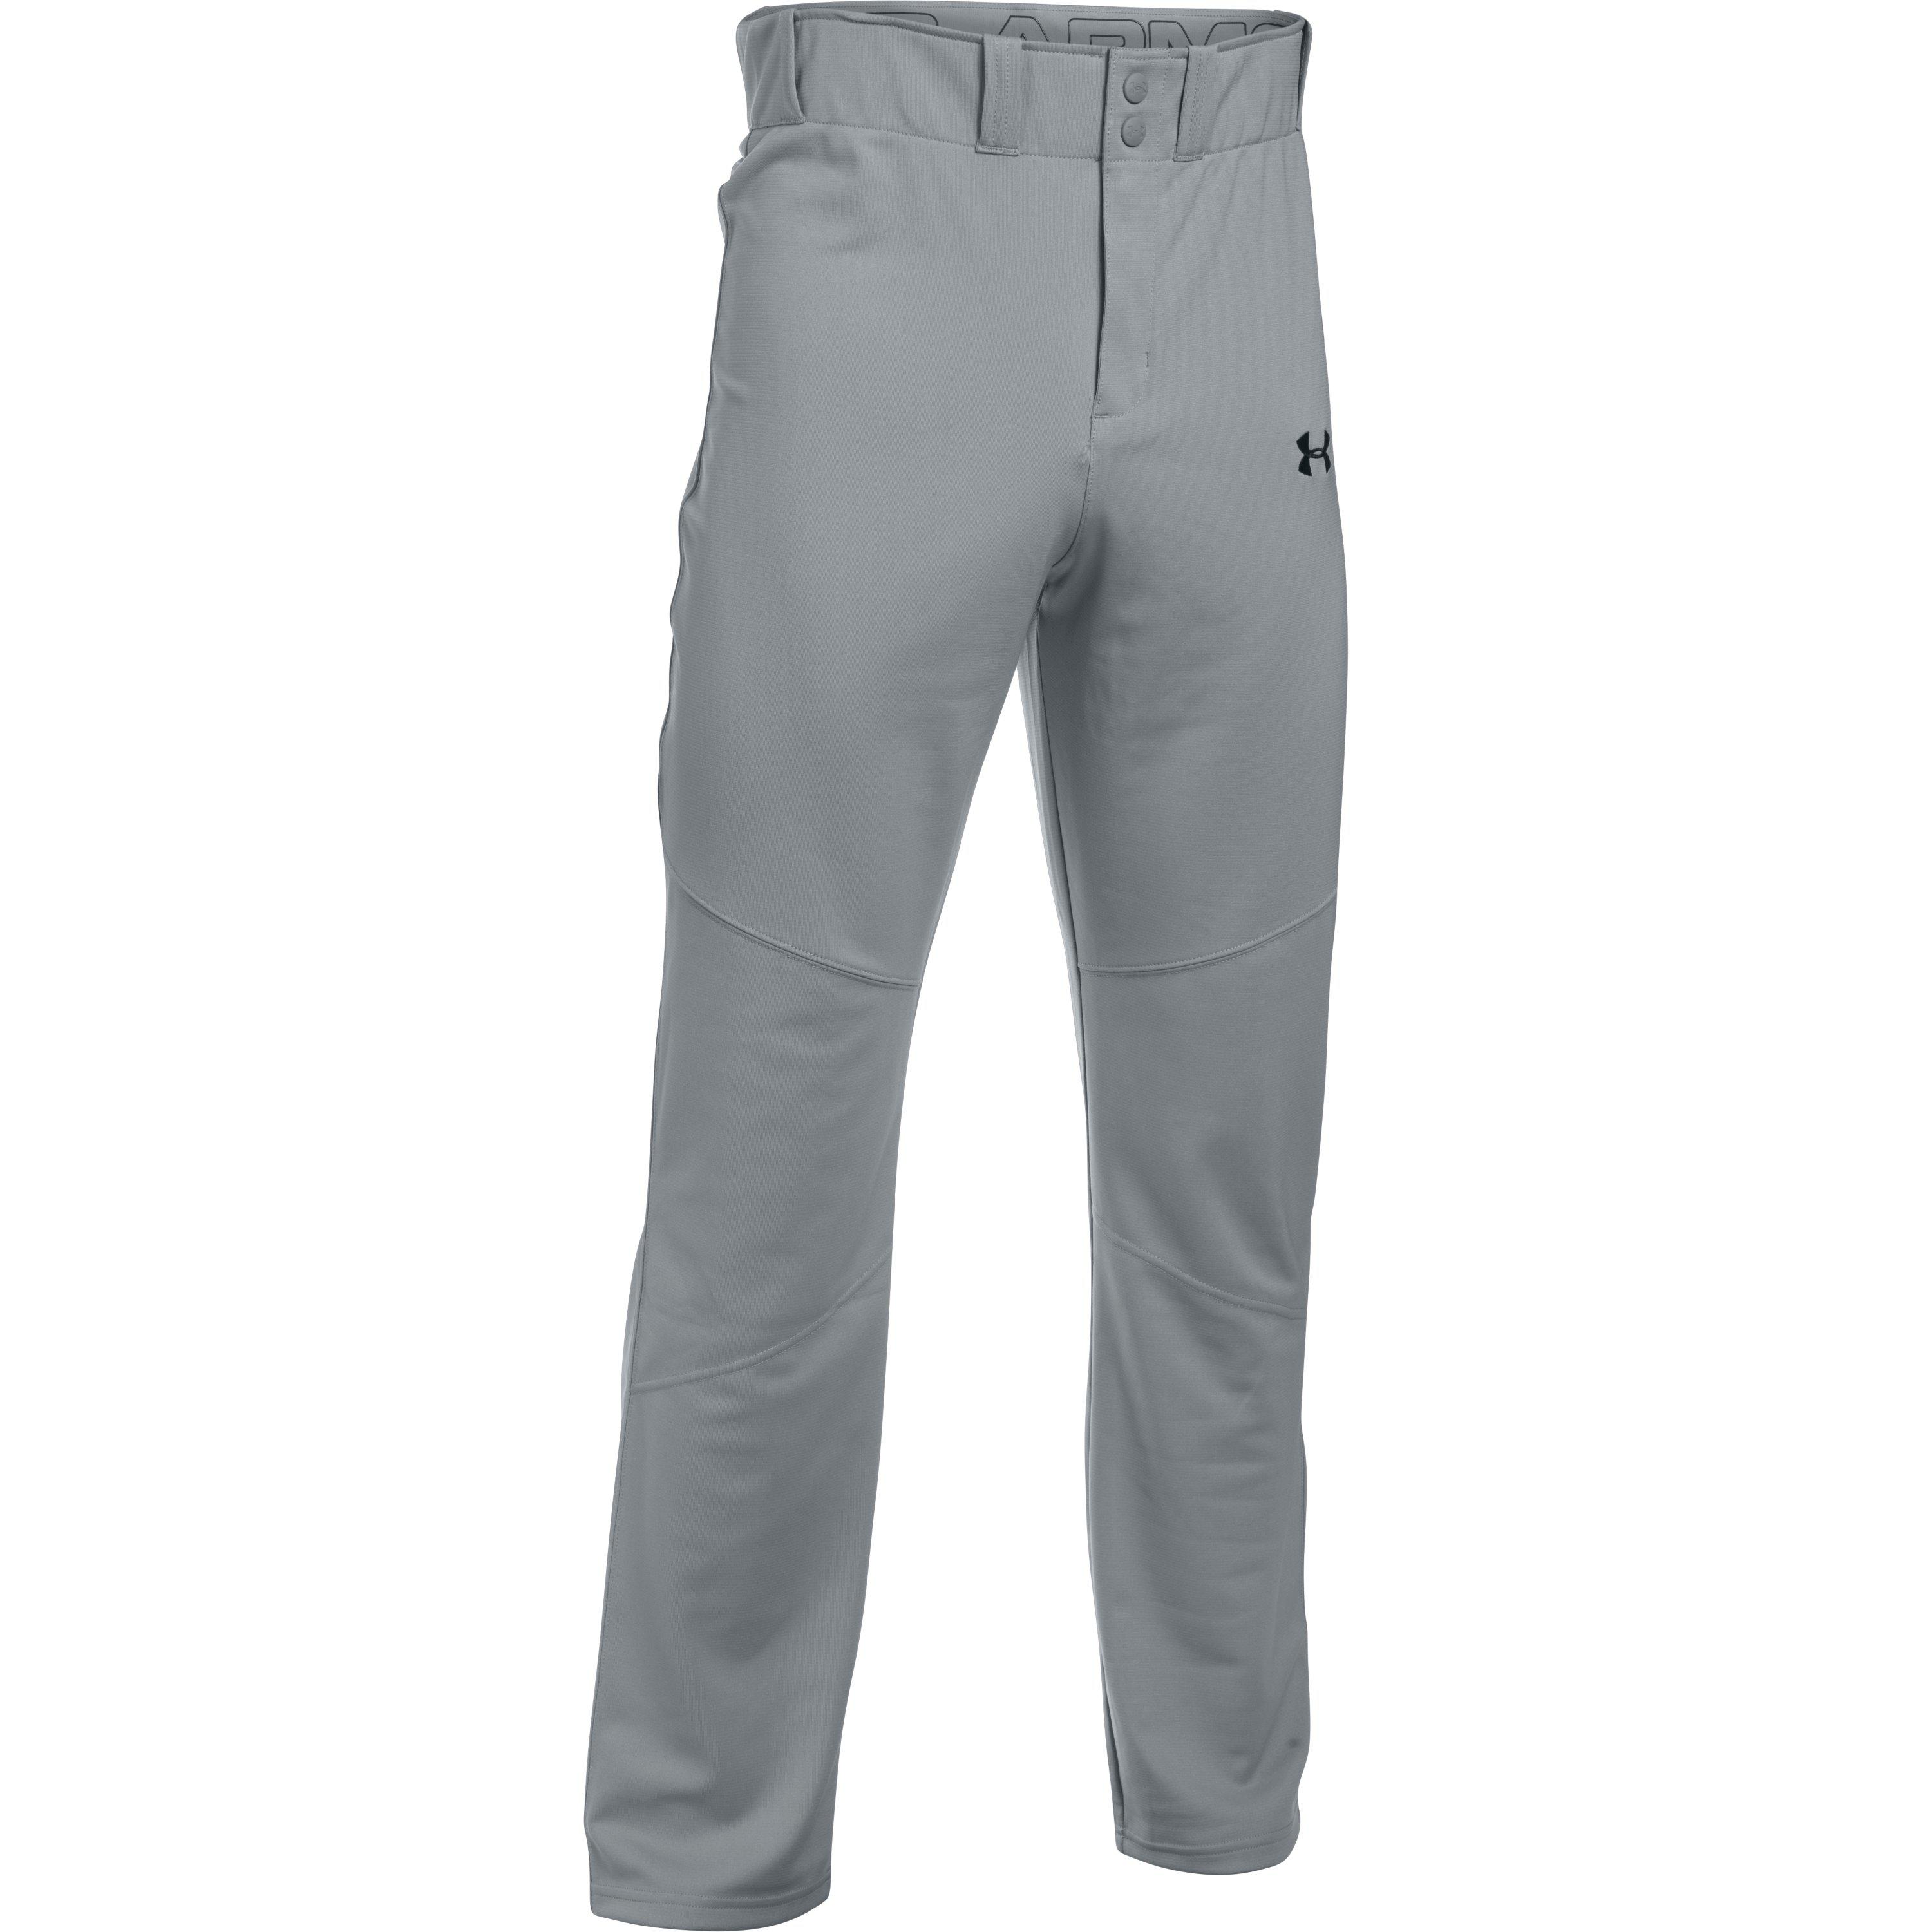 Under Armour Men's Ua Lead Off Baseball Pants in Gray for Men - Lyst